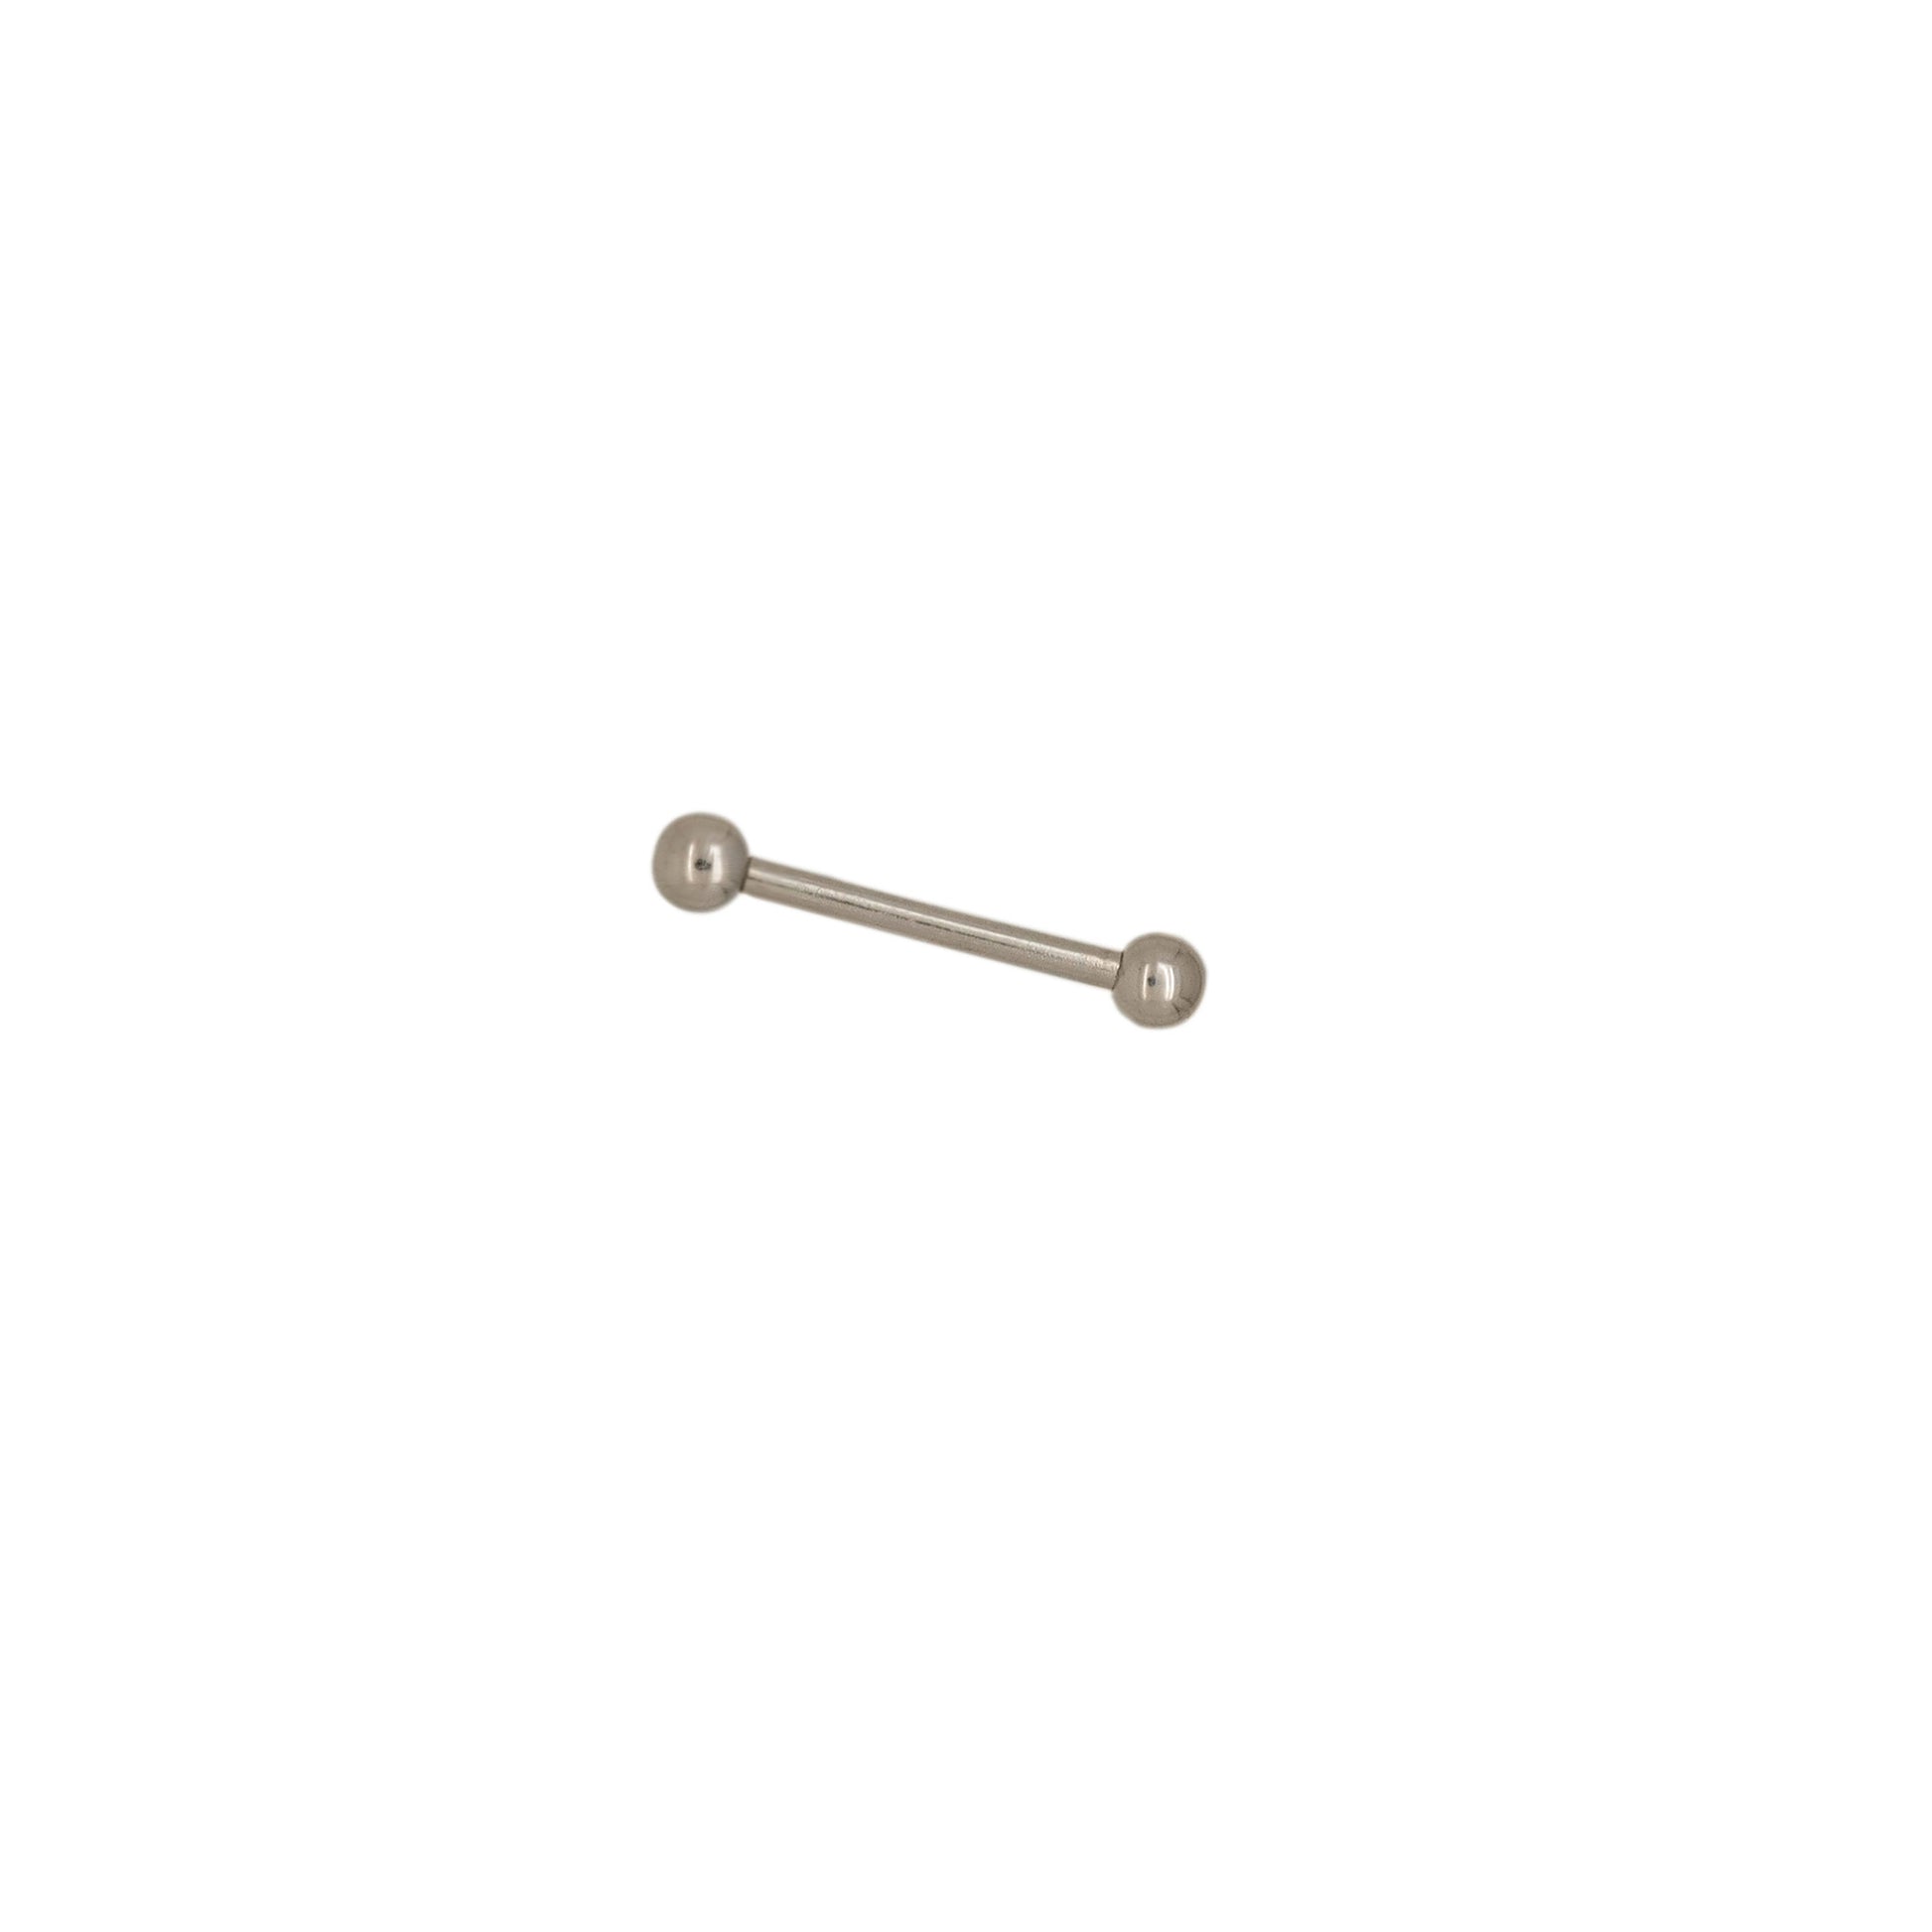 Solid 925 Silver | 16G 3mm Double Ball Straight Barbell | Eyebrow | Nipple | Ear 6mm 1/4" 8mm 5/16" 10mm 3/8" 12mm 1/2" 14mm 9/16" - Sturdy South